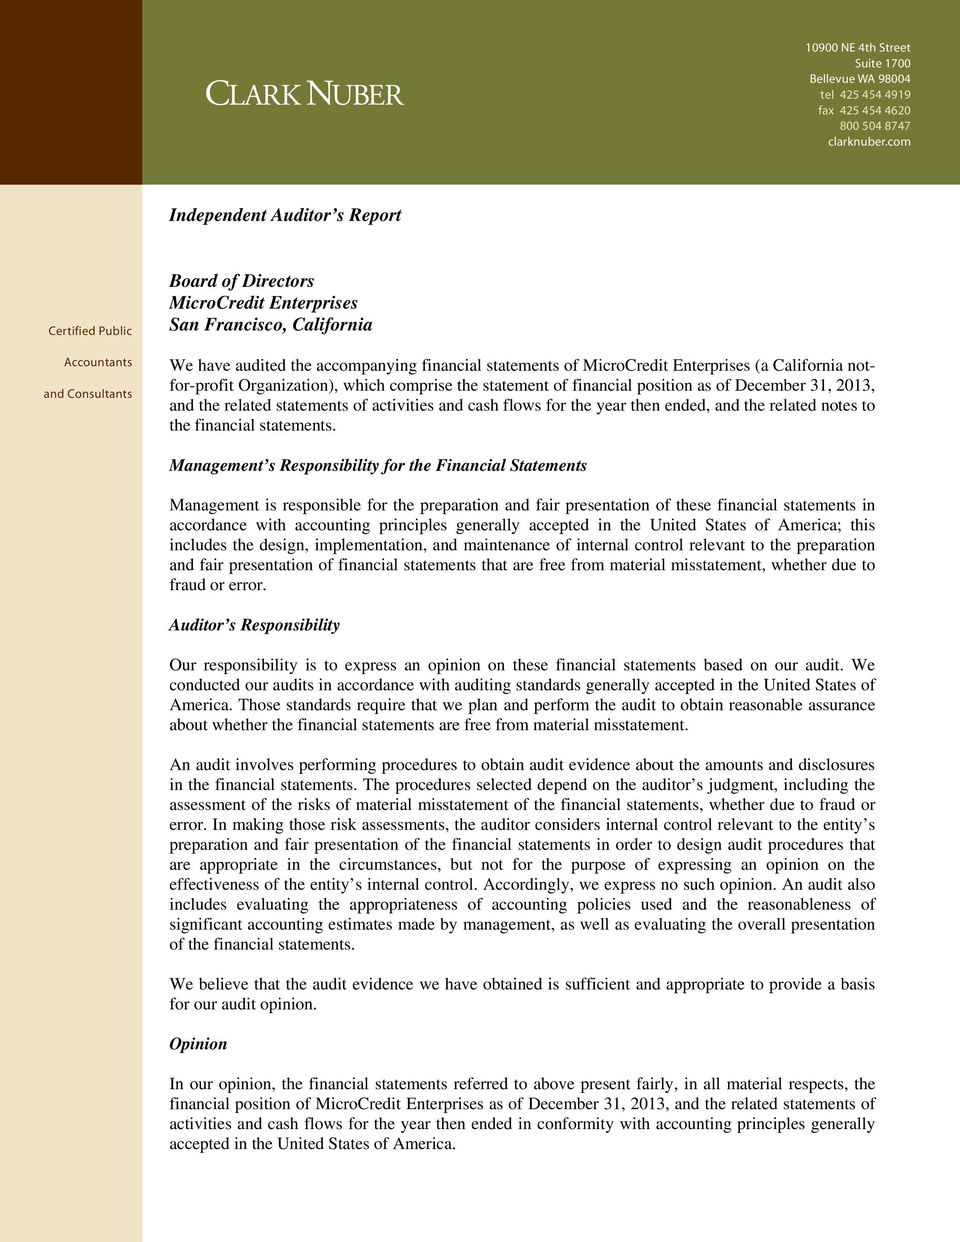 statements of MicroCredit Enterprises (a California notfor-profit Organization), which comprise the statement of financial position as of December 31, 2013, and the related statements of activities